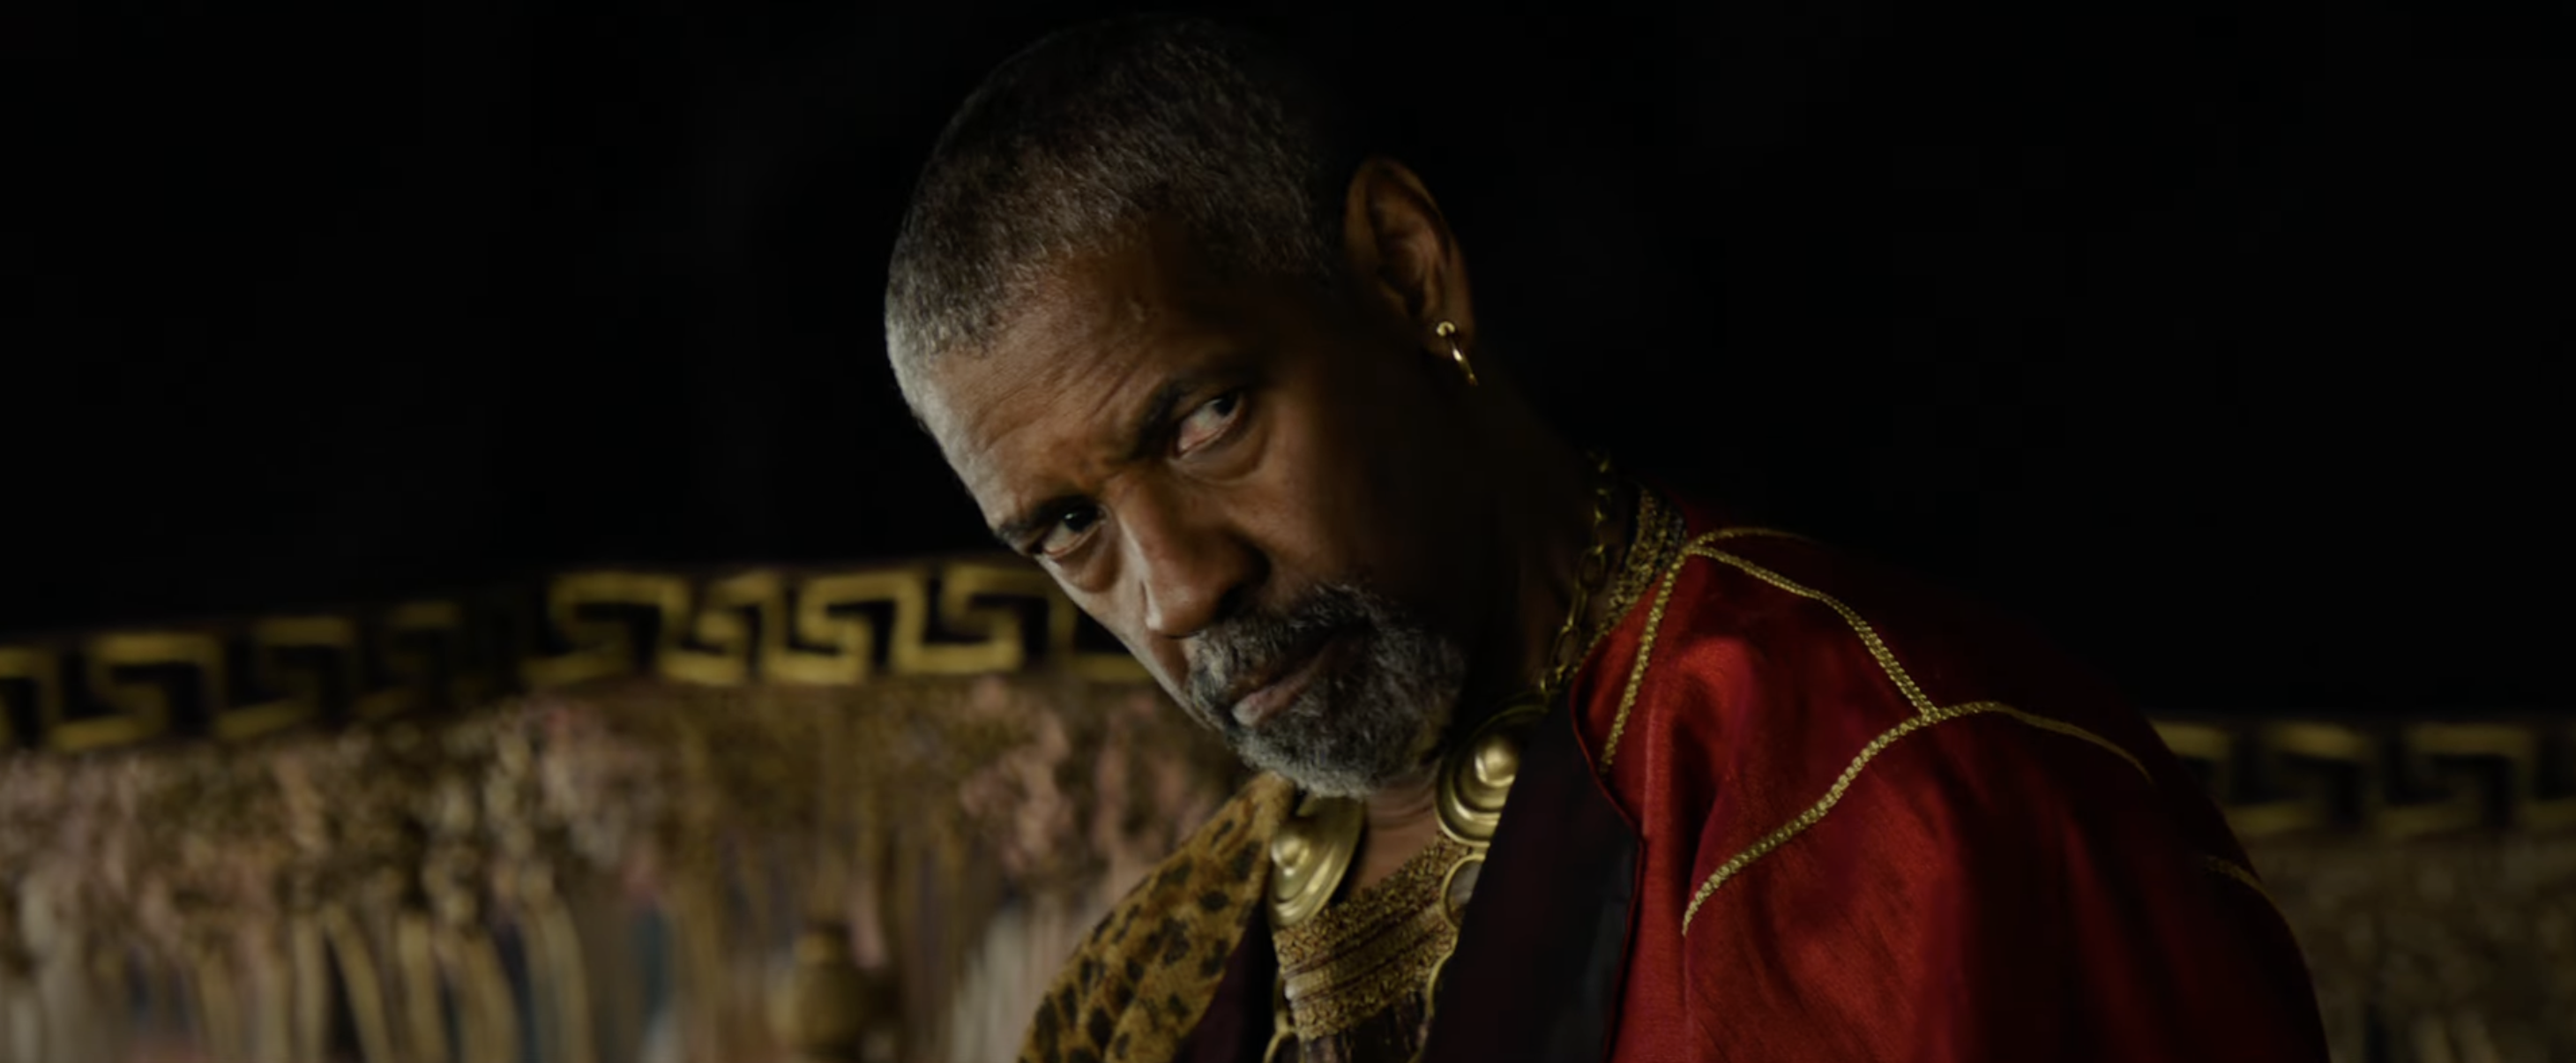 Denzel Washington in a scene, wearing regal attire with elaborate gold details, looking intensely with a serious expression